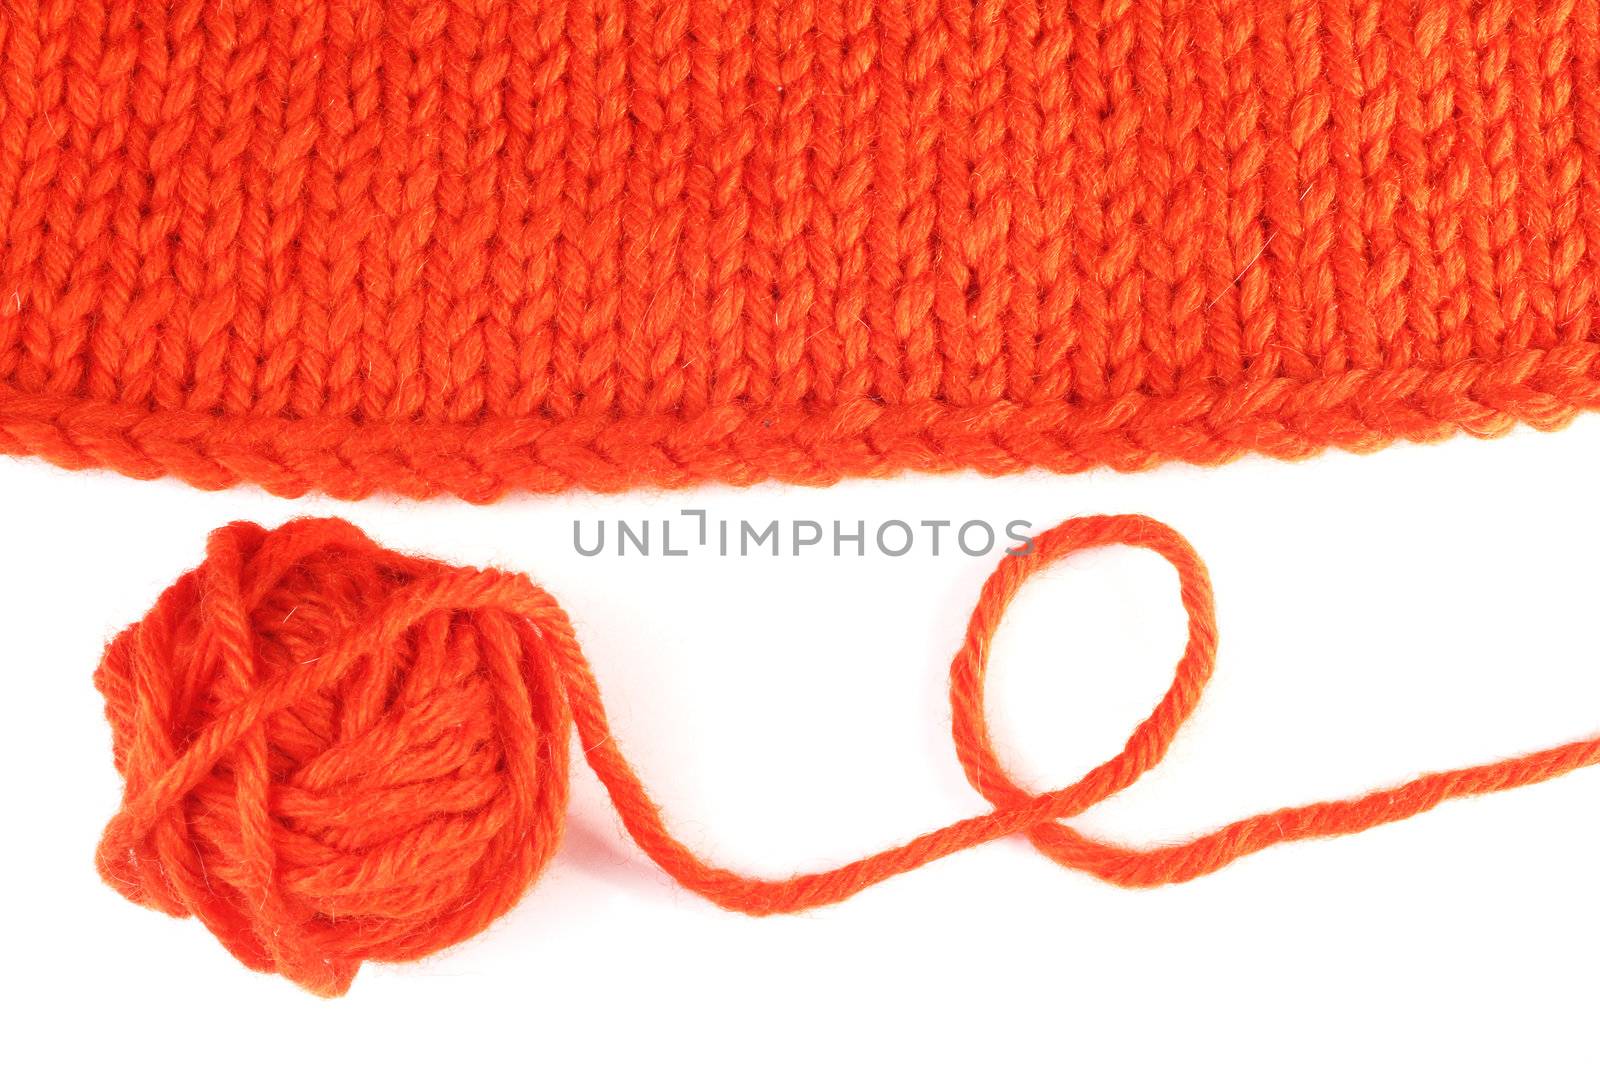 Wool yarn and knitted textile isolated on white background